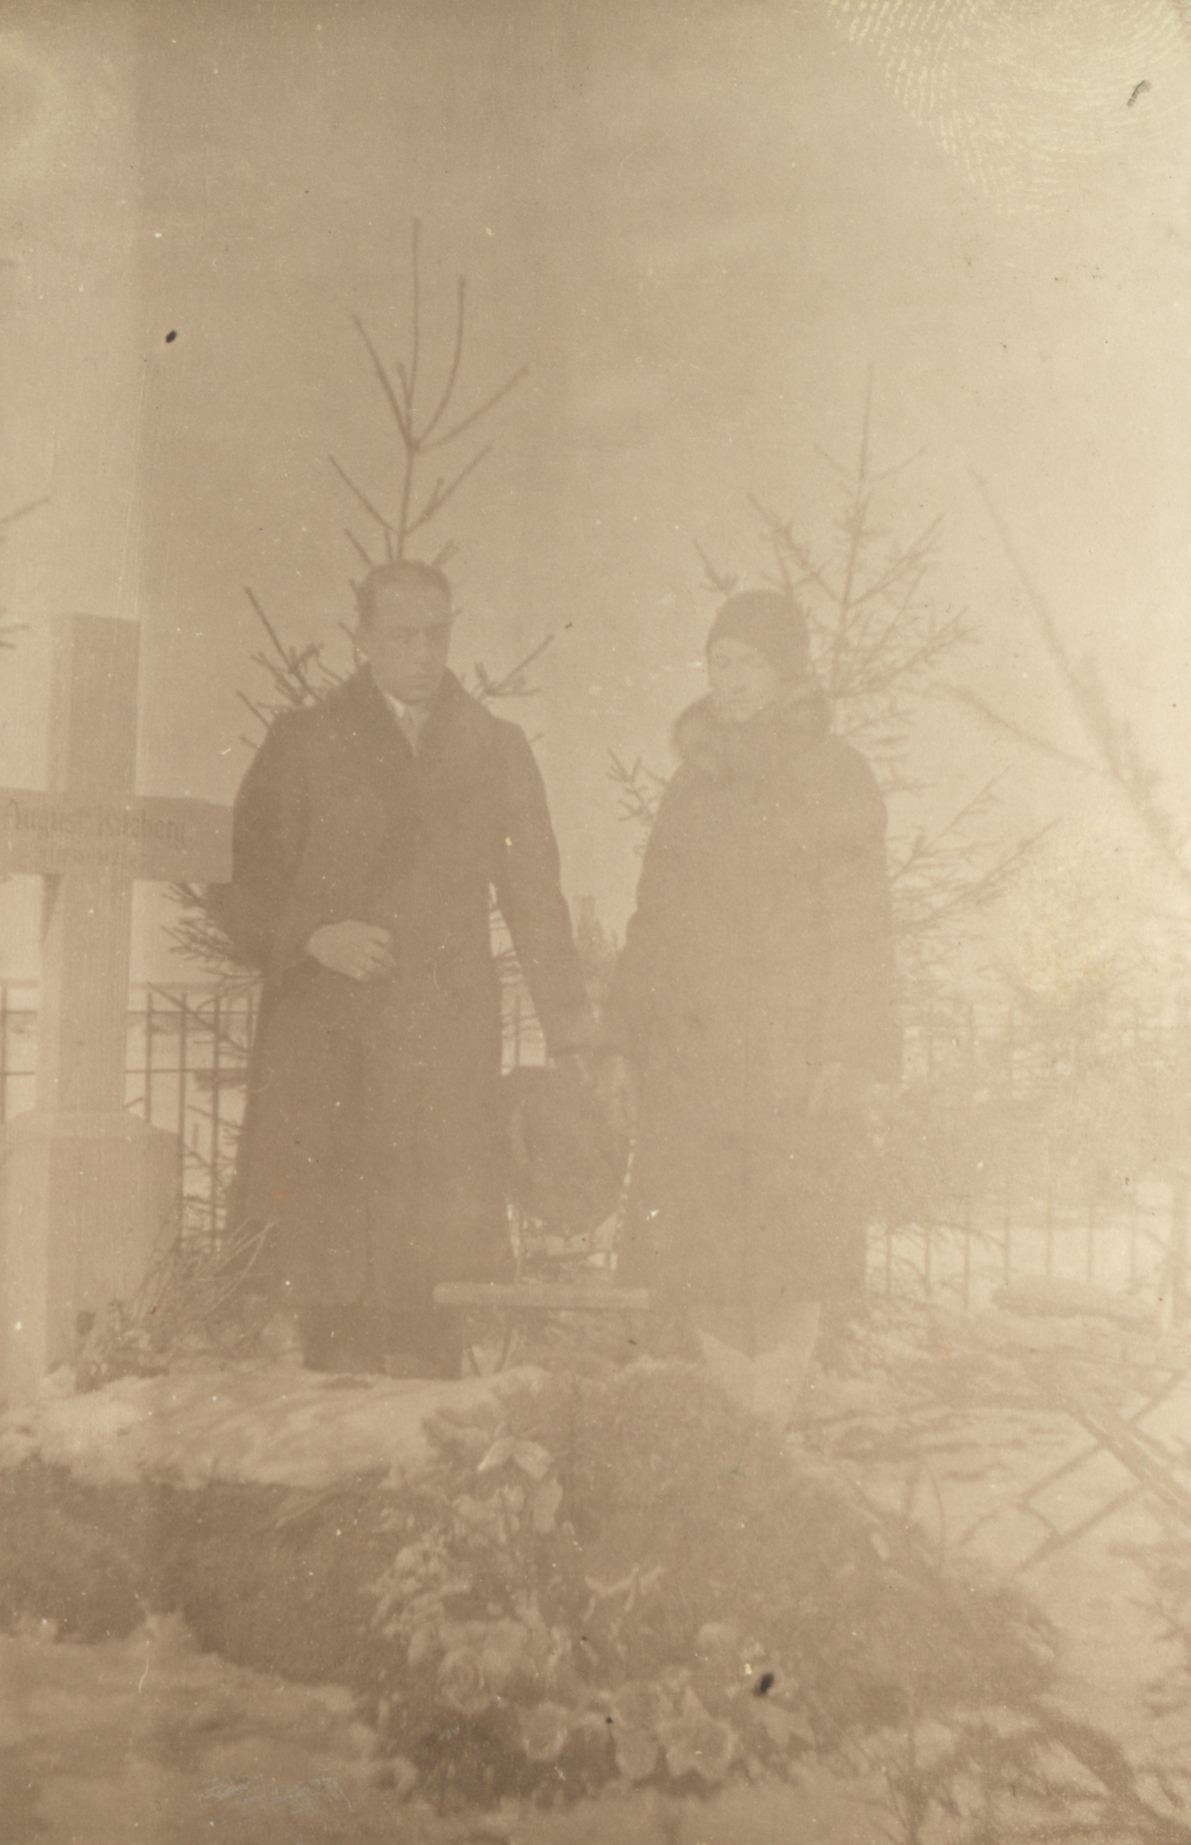 Jaan and Silvia Kitzberg in the grave of August Kitzberg